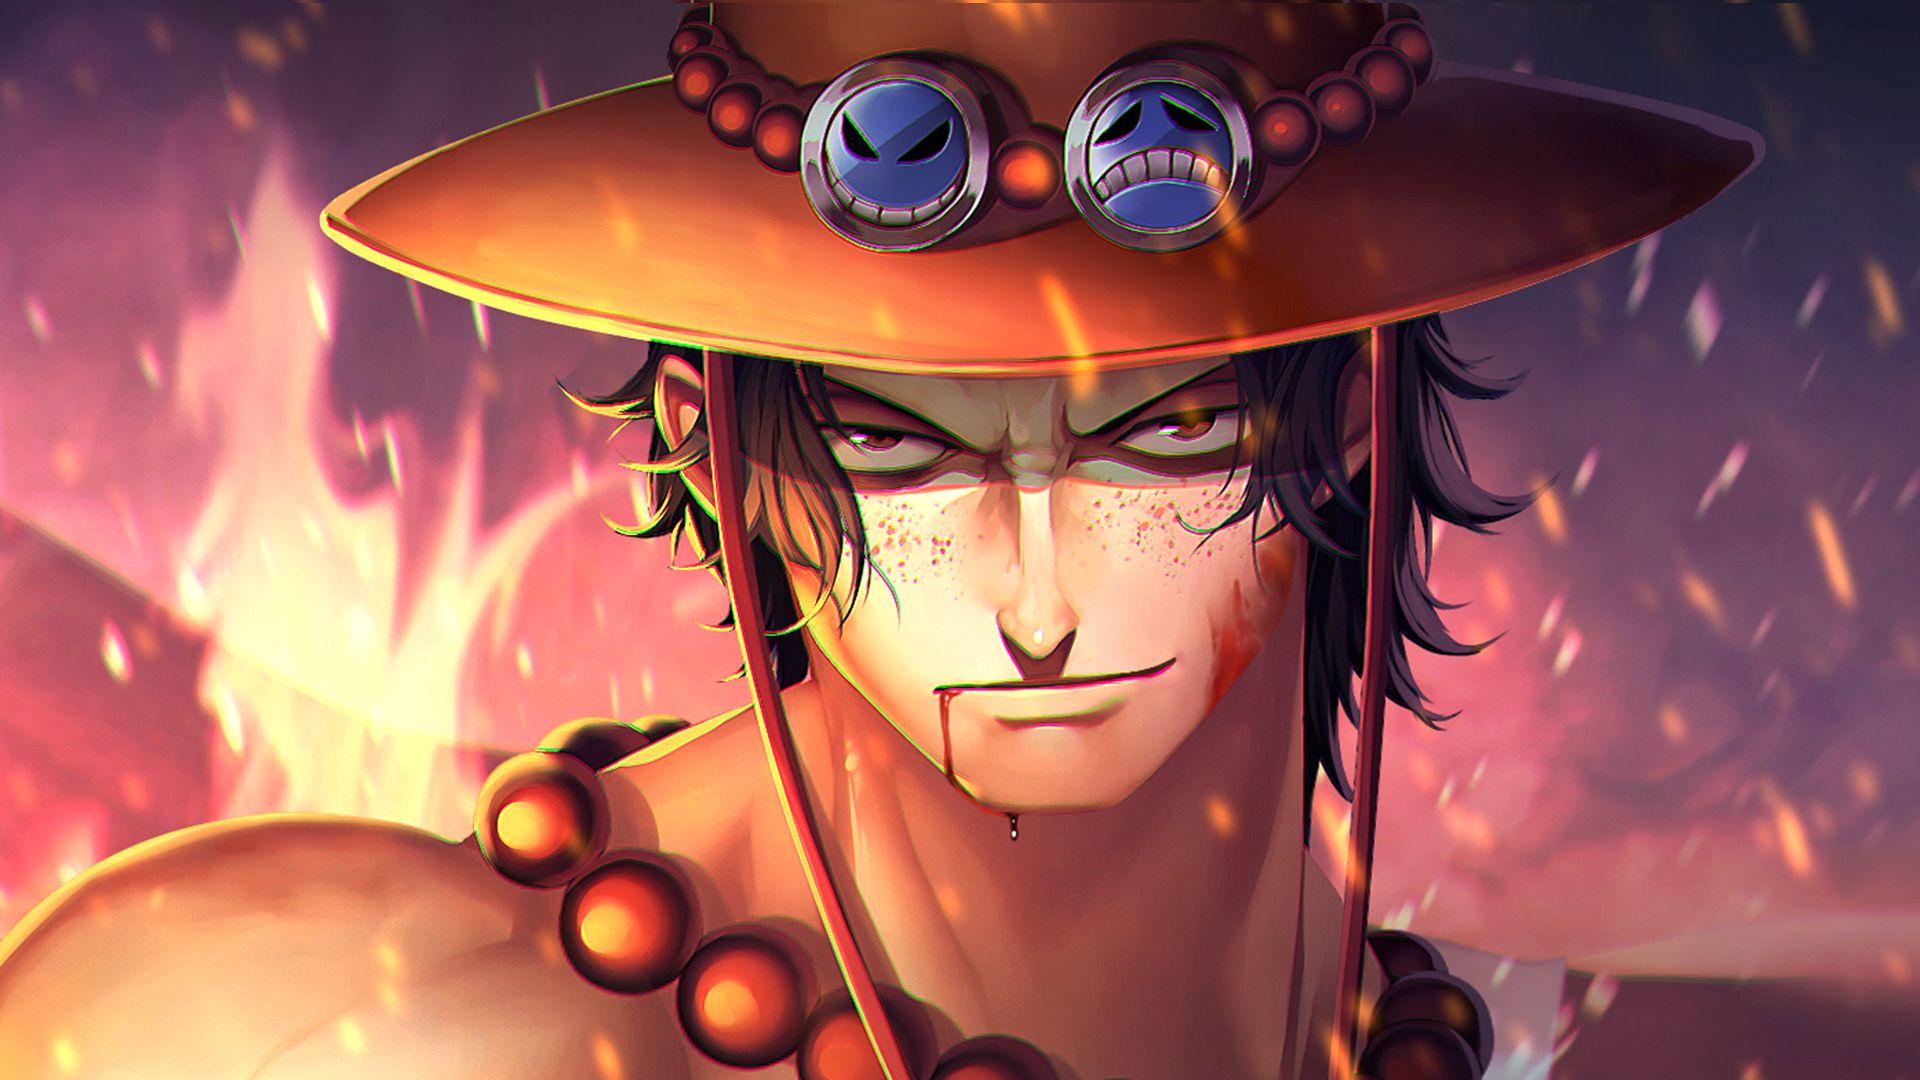 Portgas D Ace, HD Anime, 4k Wallpapers, Image, Backgrounds, Photos.